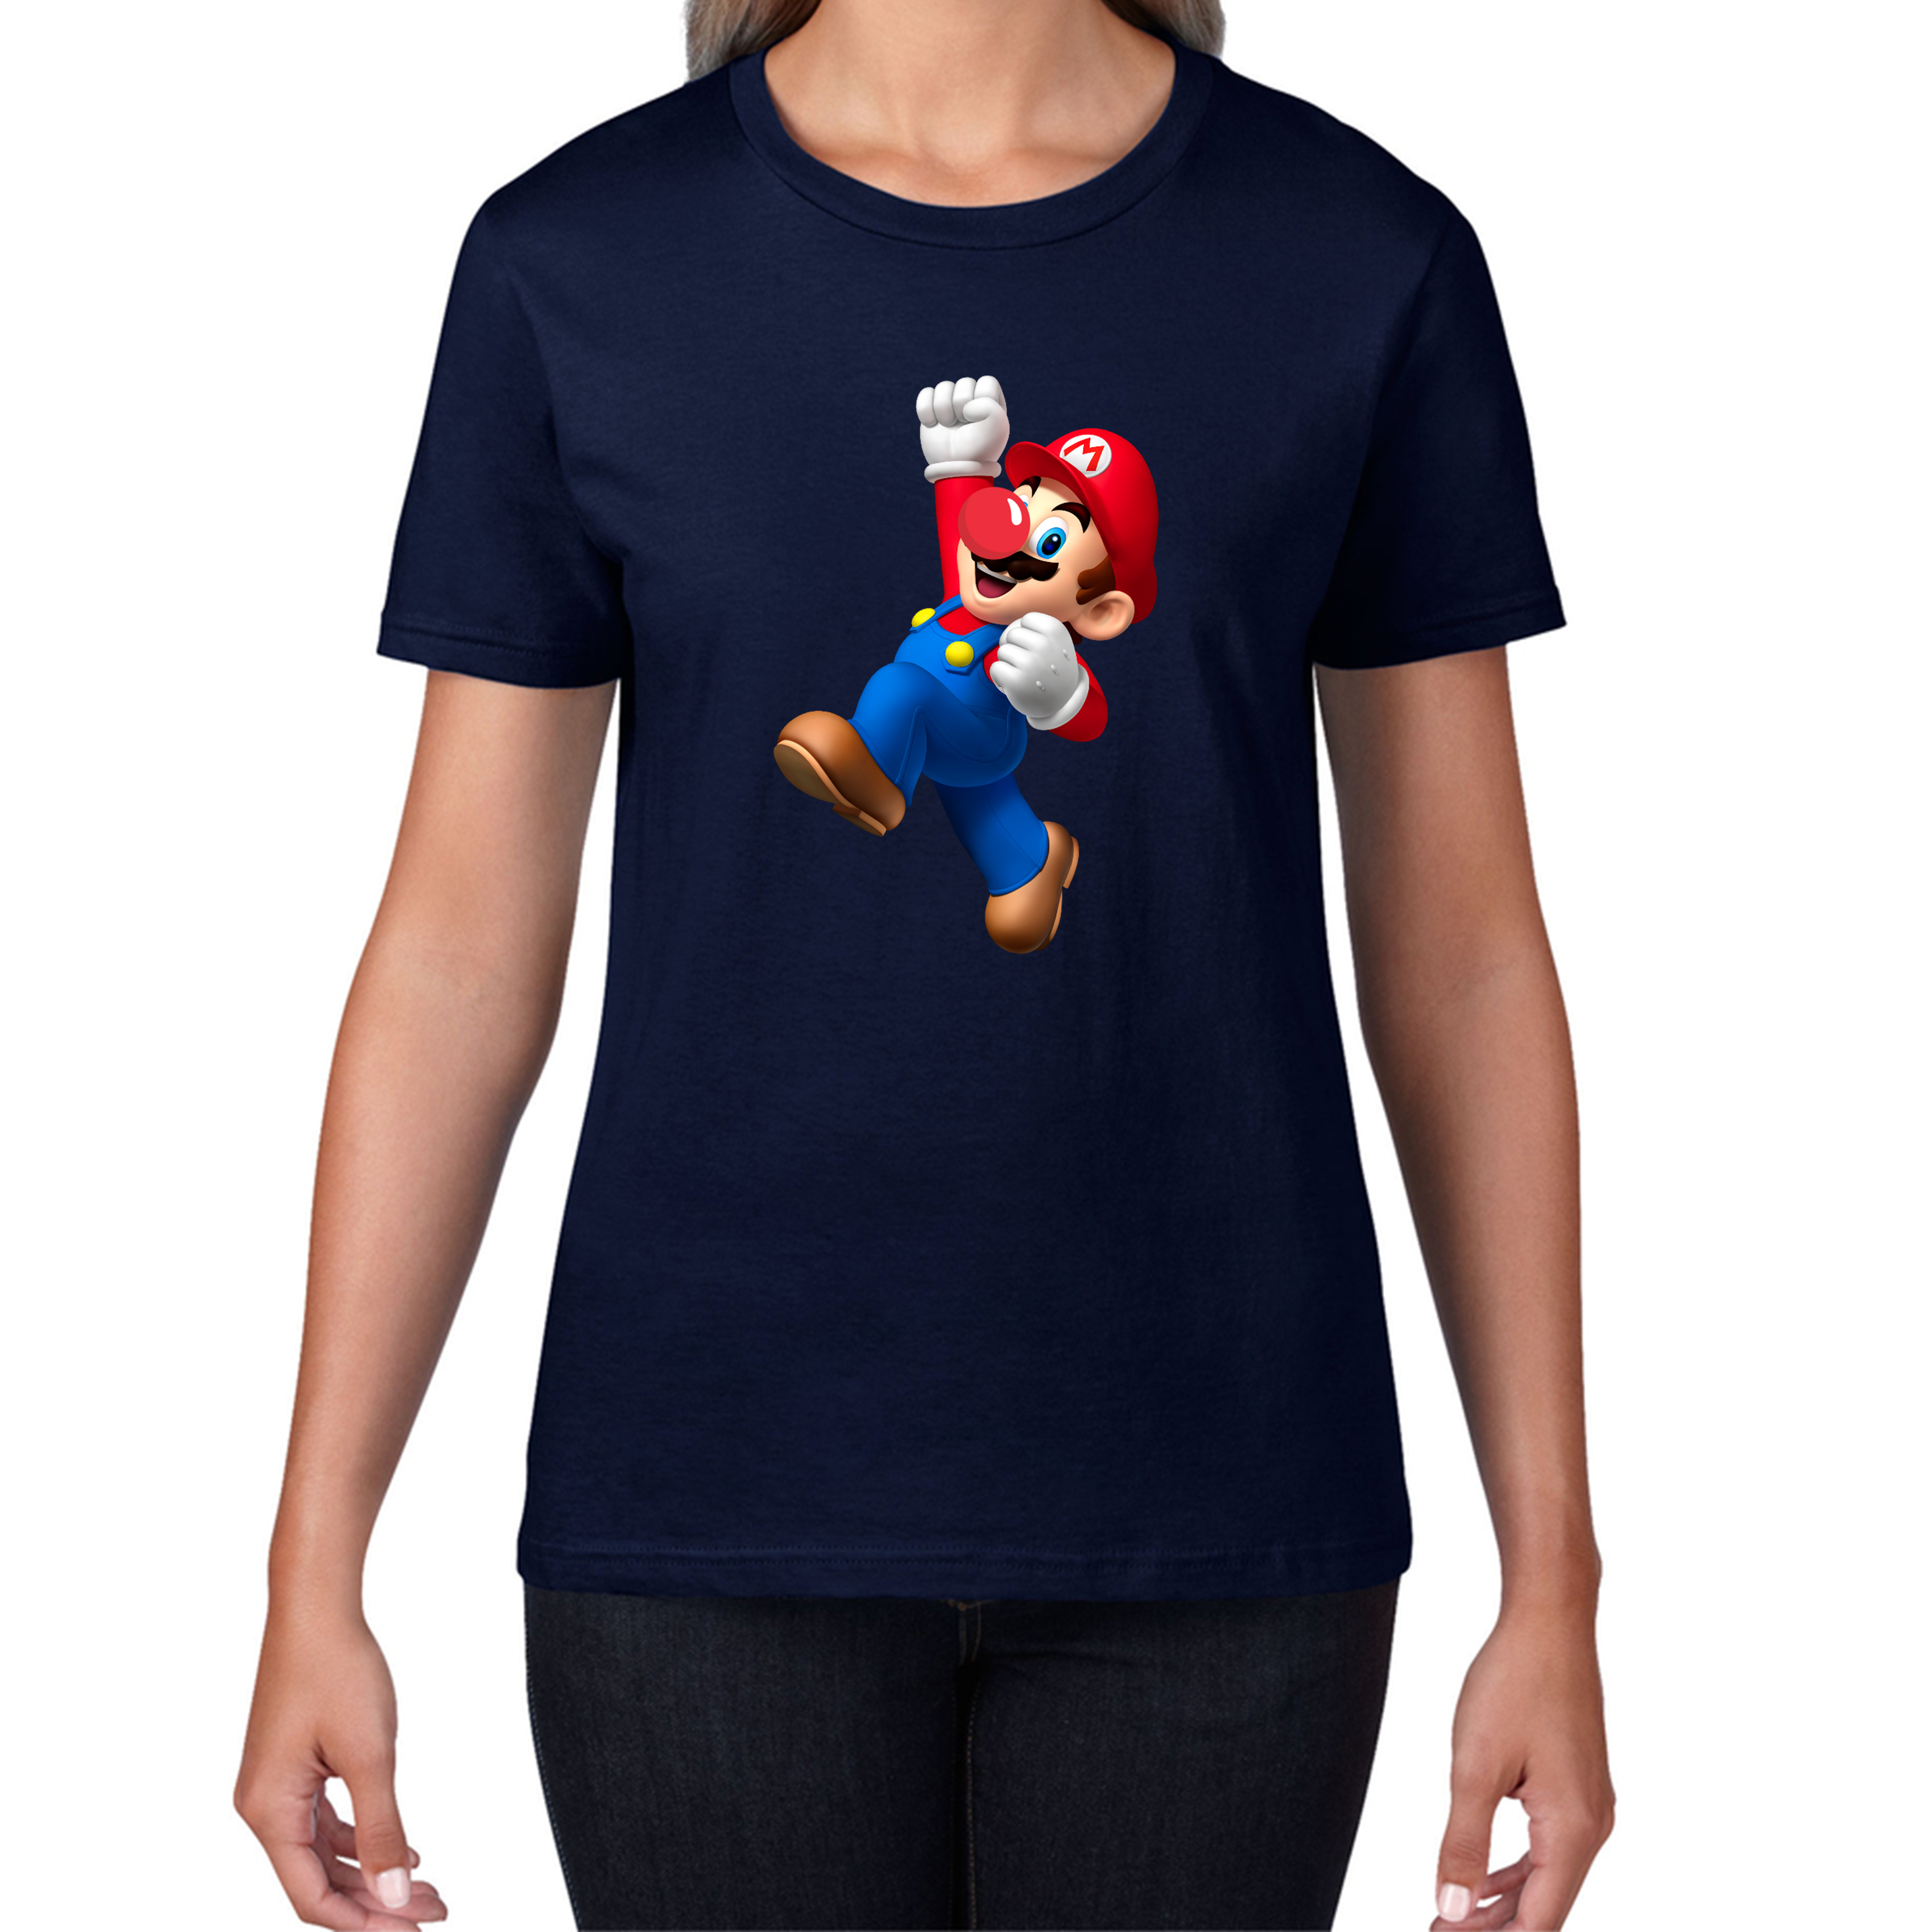 Super Mario Bros Red Nose Day Ladies T Shirt. 50% Goes To Charity